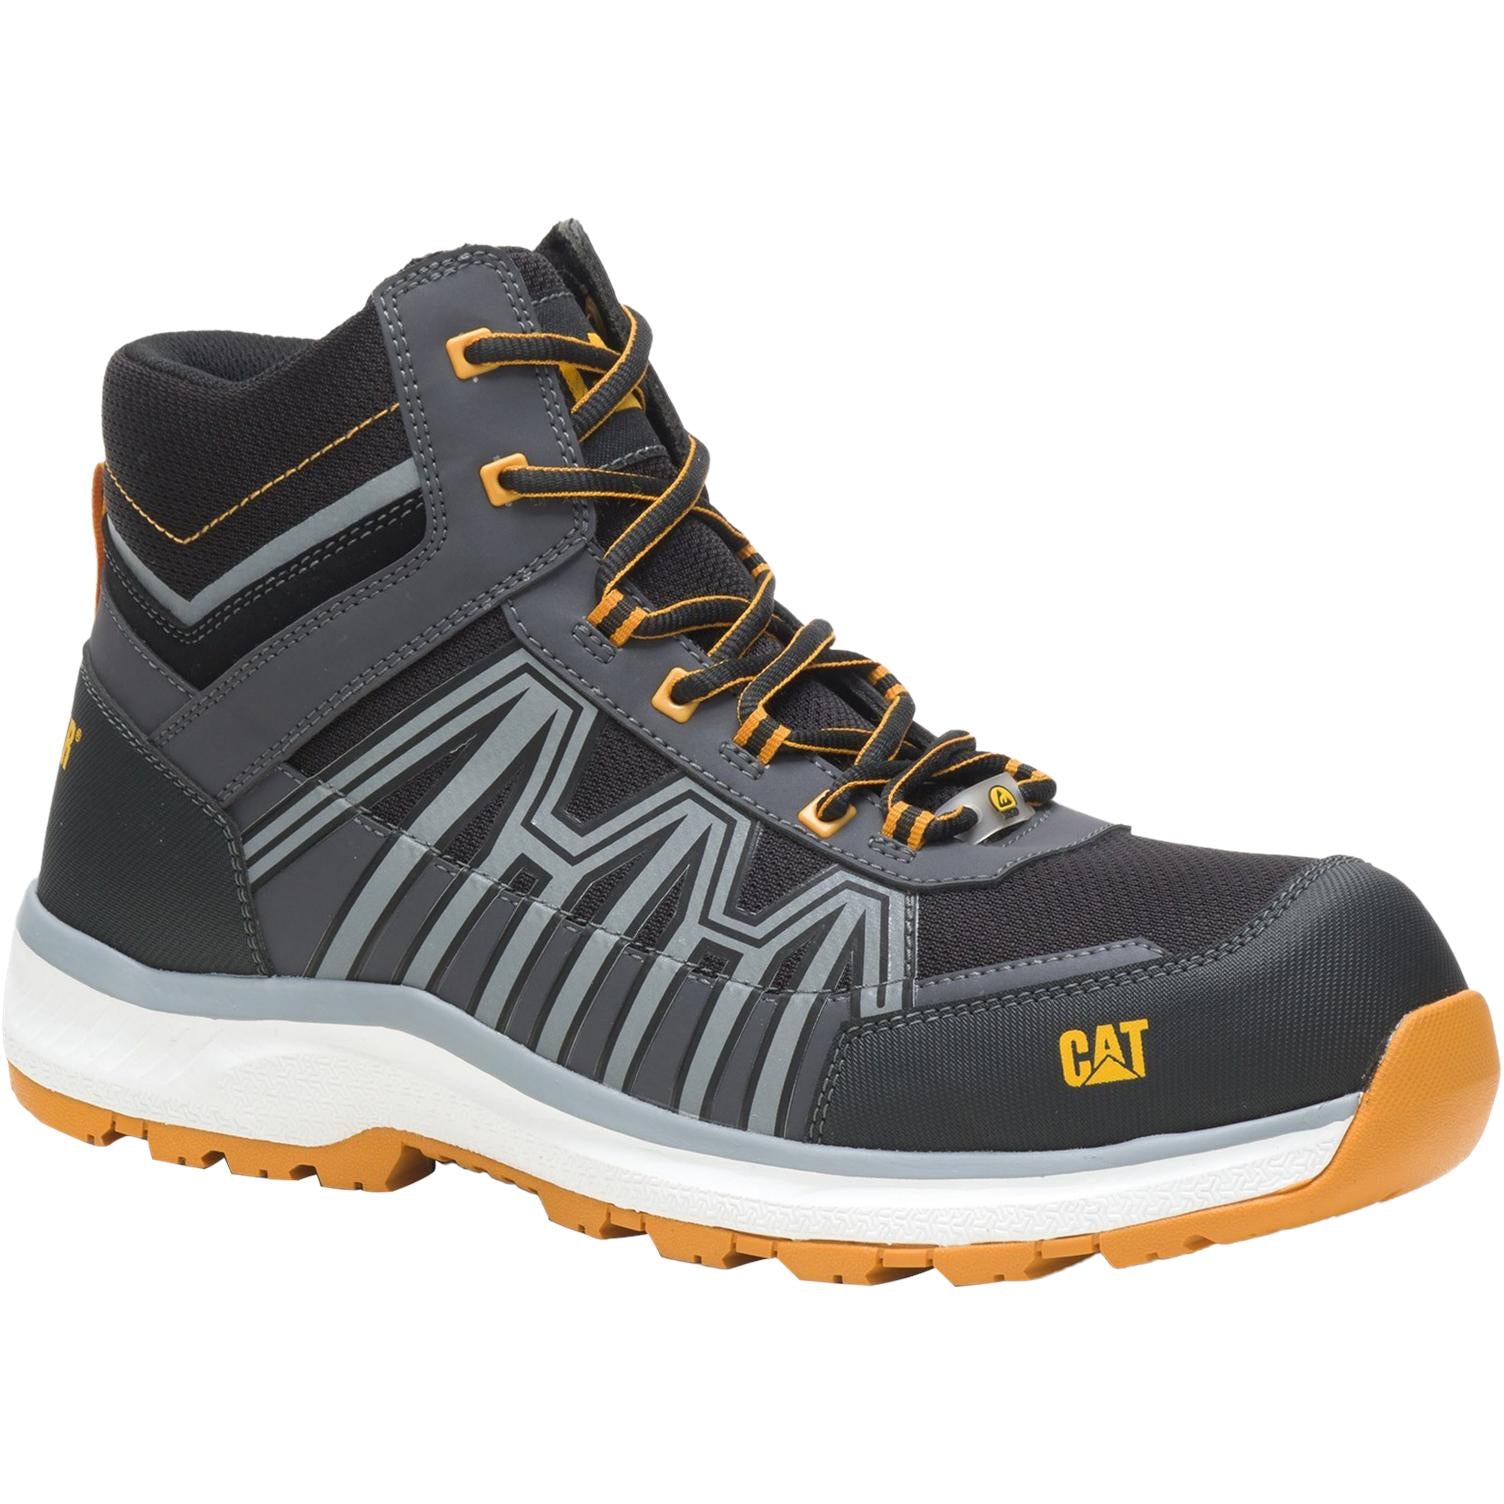 Caterpillar Charge Hiker Boots